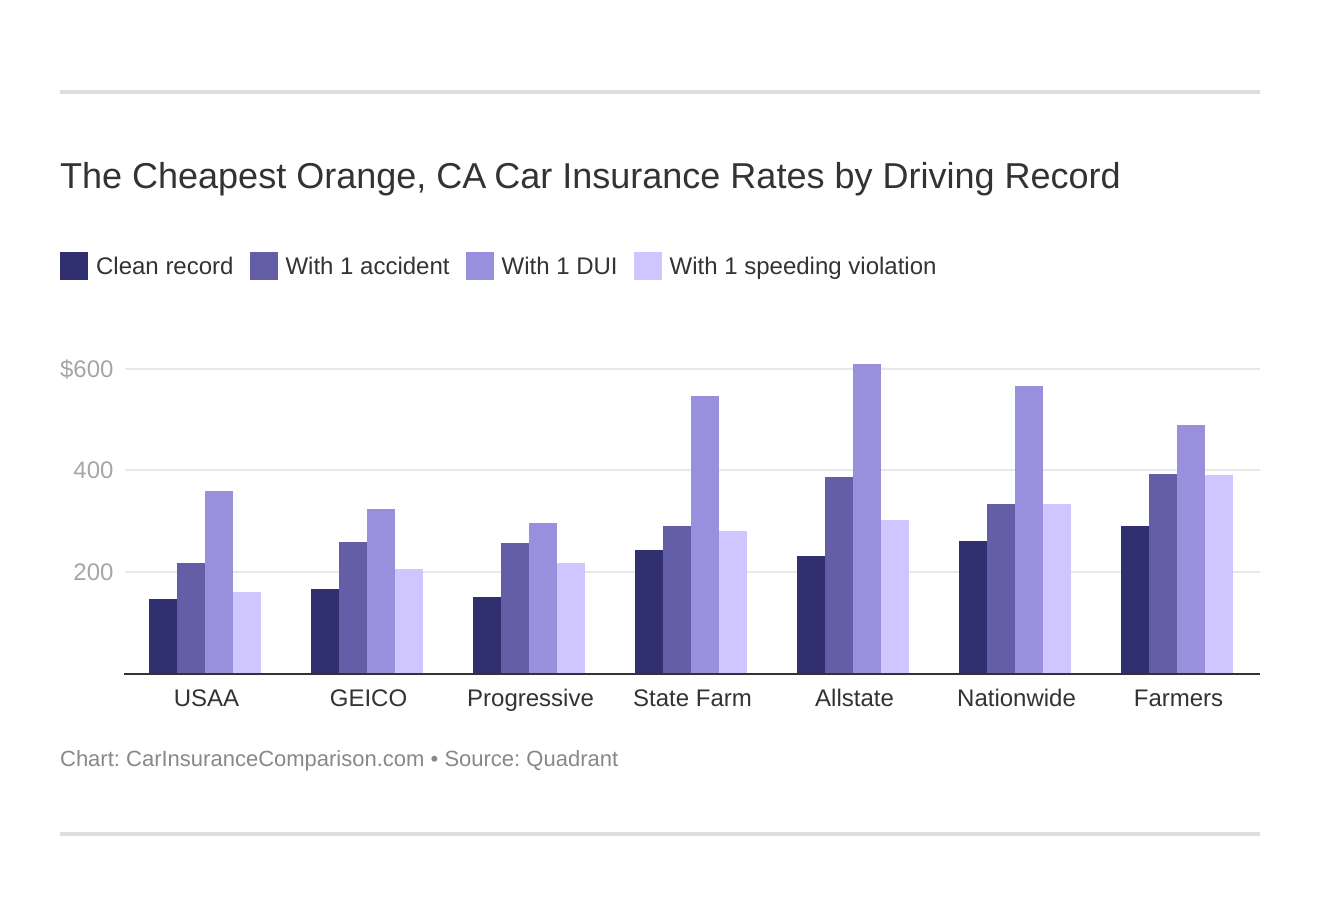 The Cheapest Orange, CA Car Insurance Rates by Driving Record